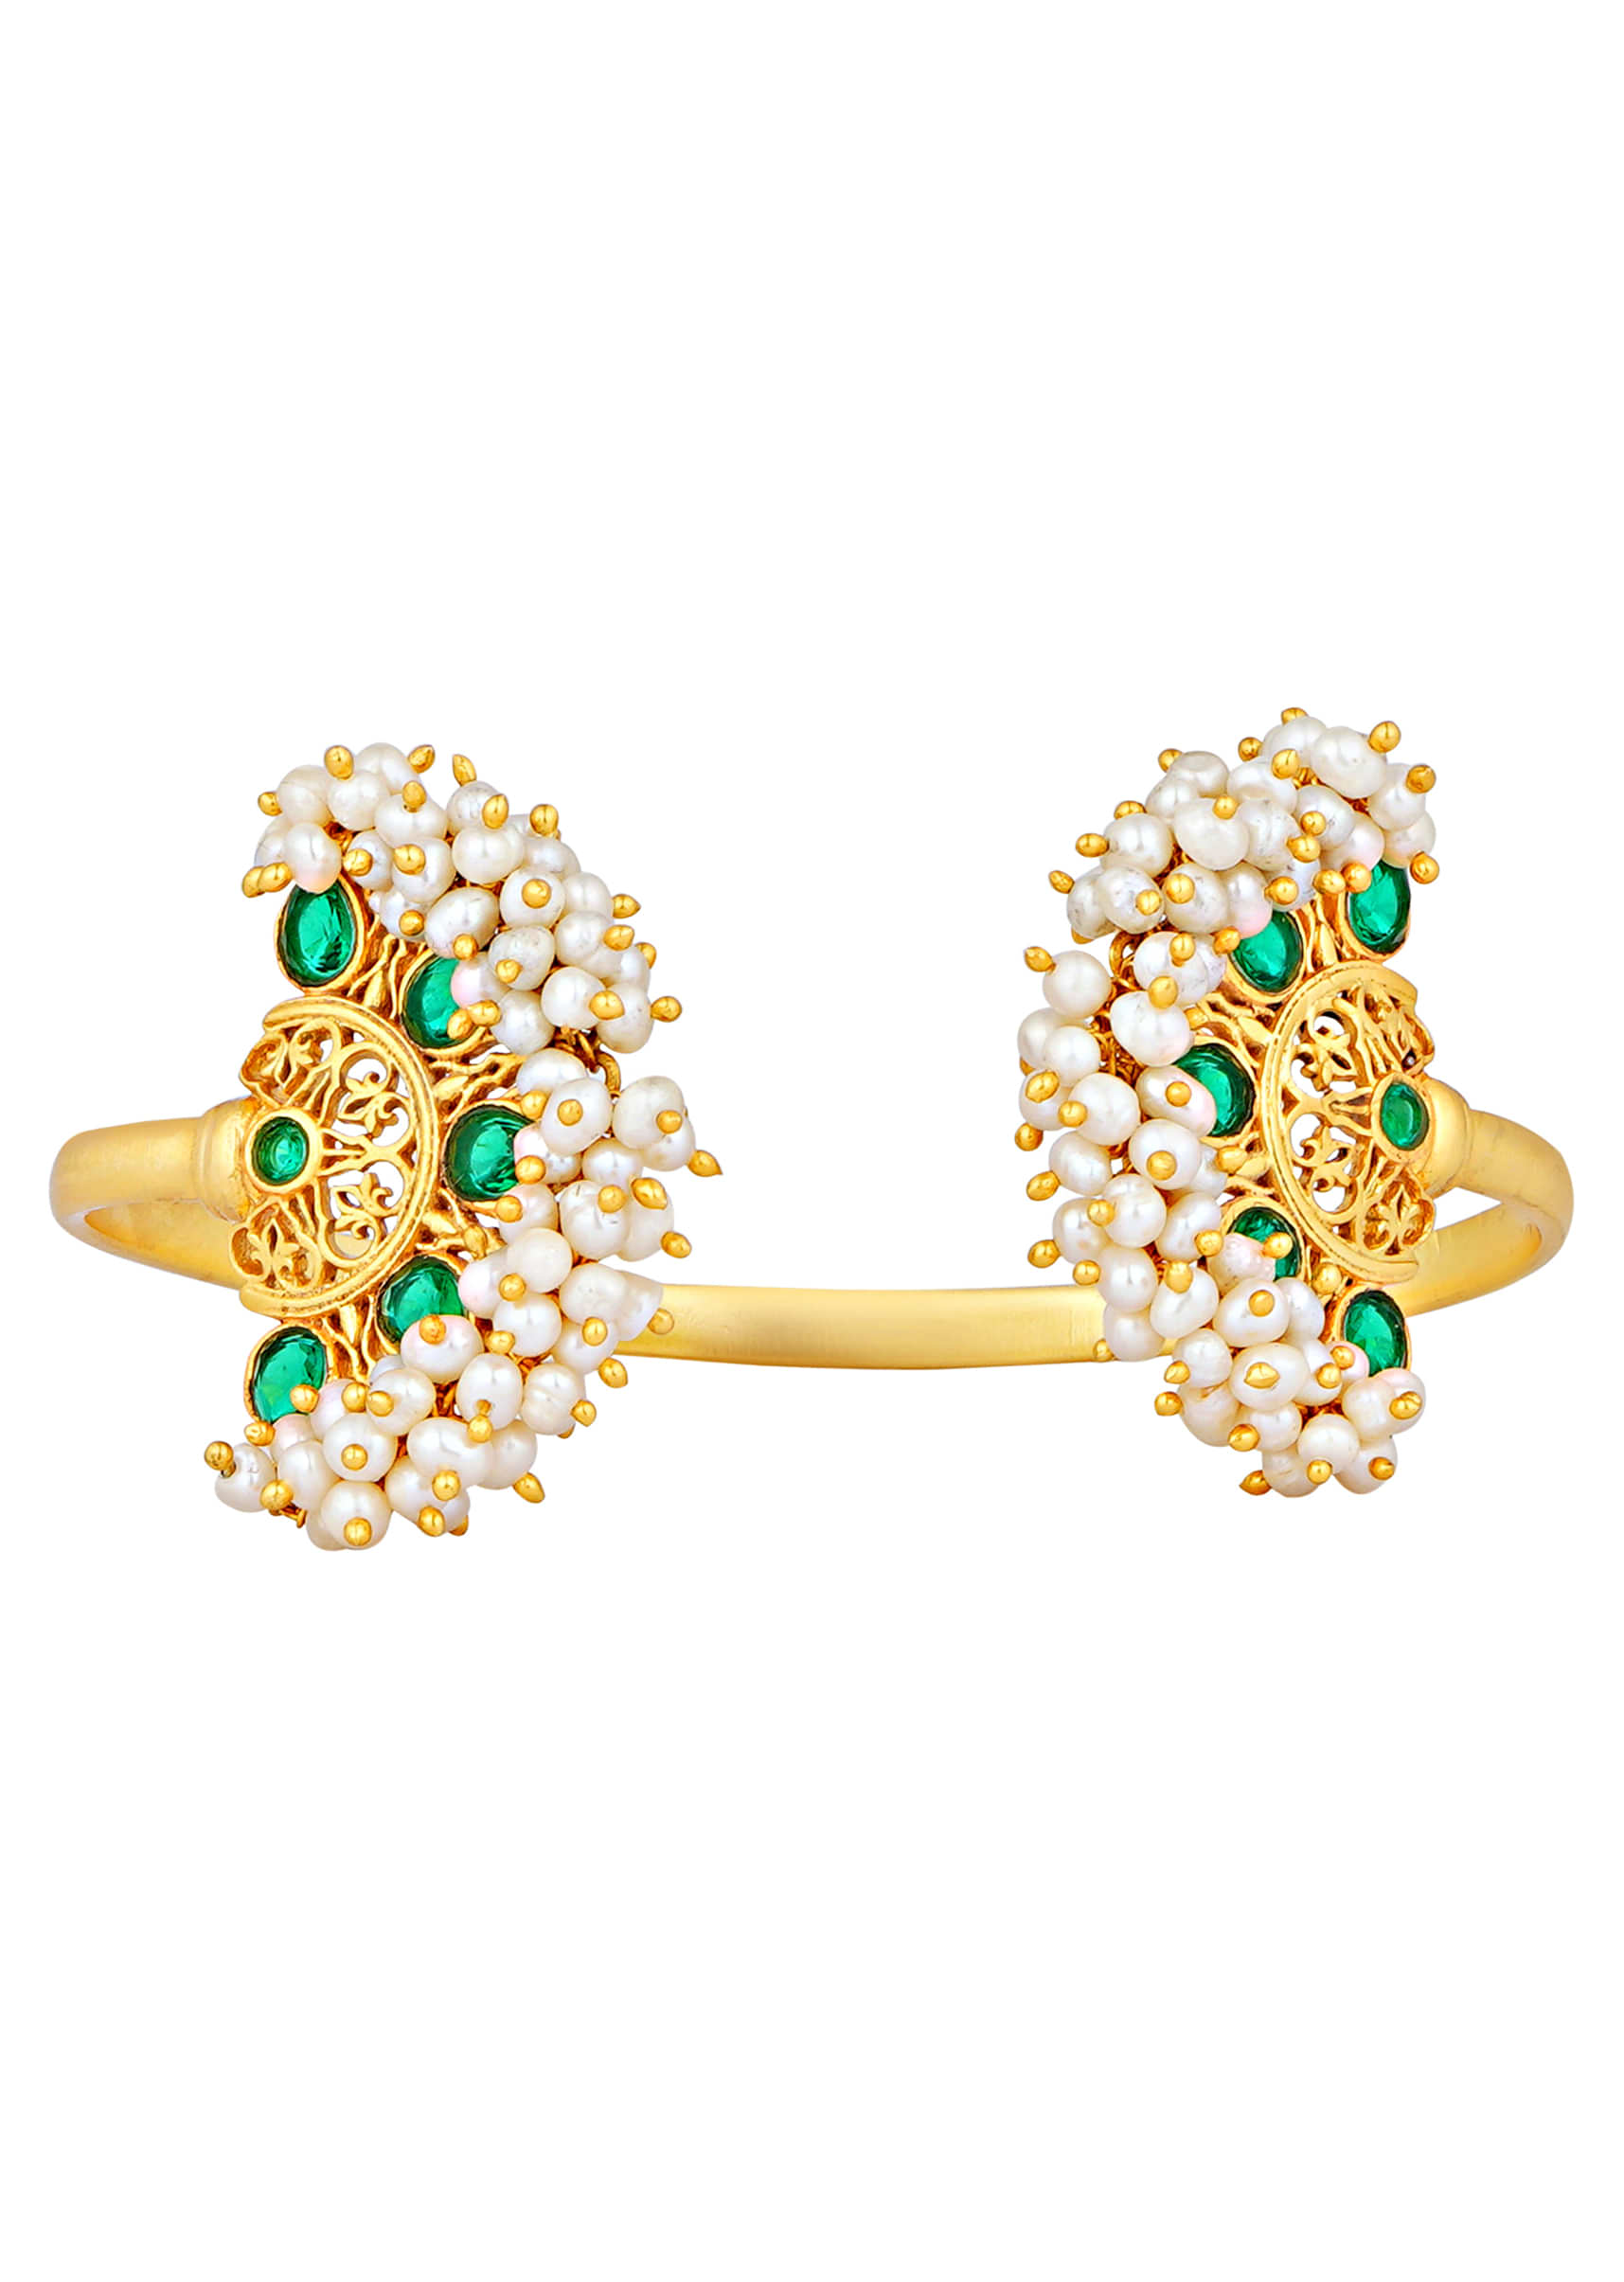 Gold Plated Bracelet With Green Cz And Pearls In Floral Motifs On Both Sides By Zariin